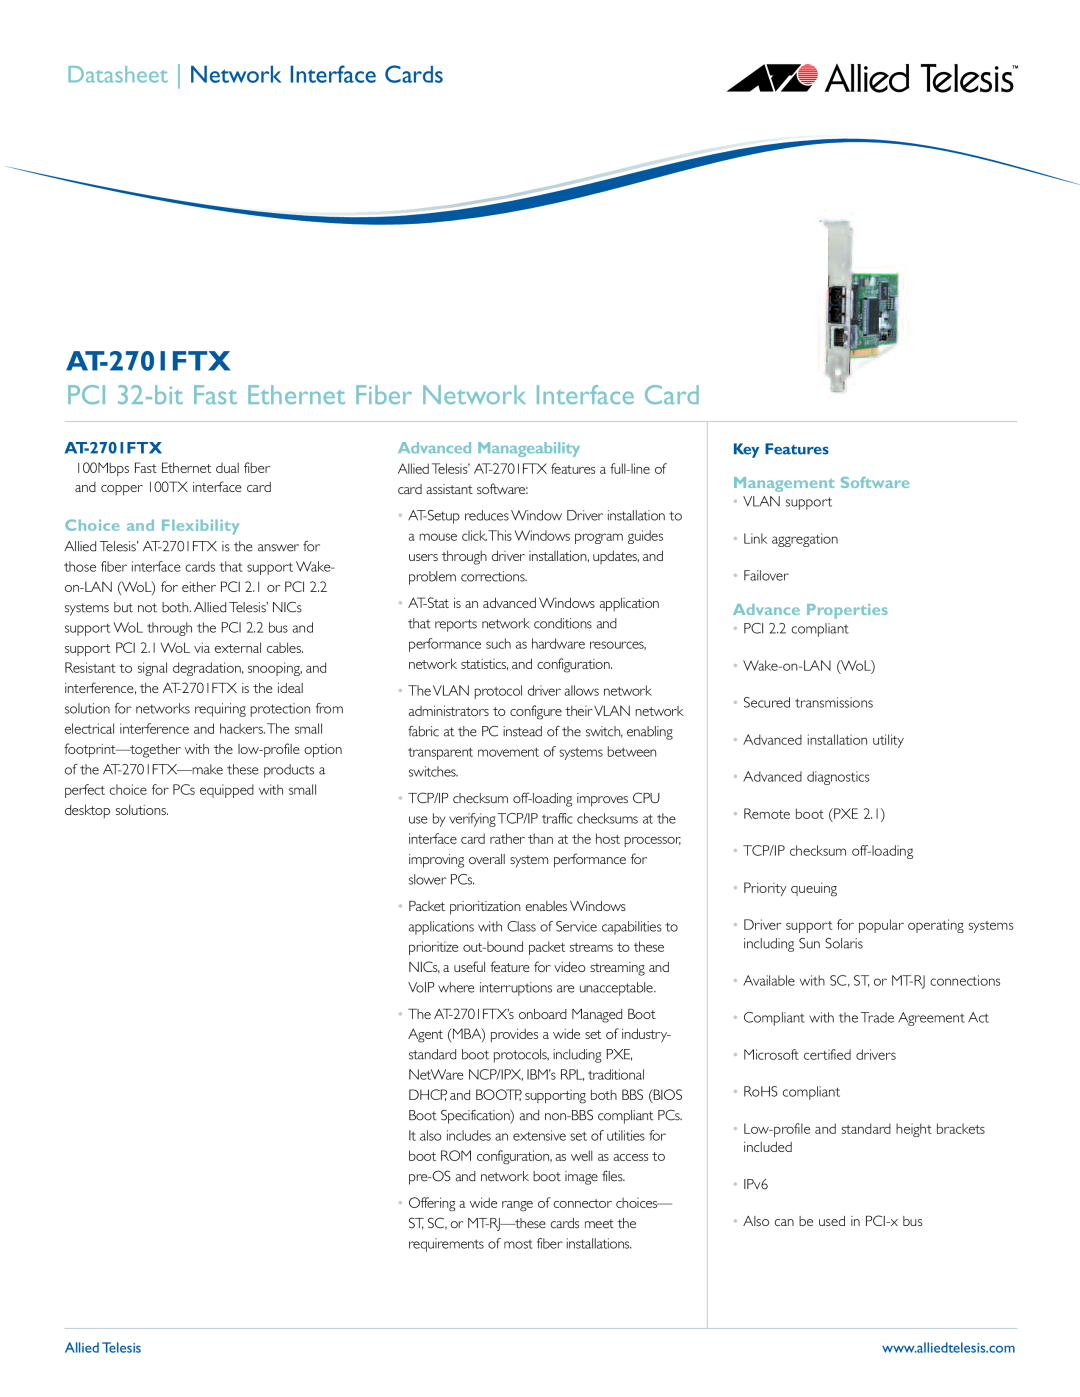 Allied Telesis AT-2701FTX manual PCI 32-bit Fast Ethernet Fiber Network Interface Card, Datasheet Network Interface Cards 